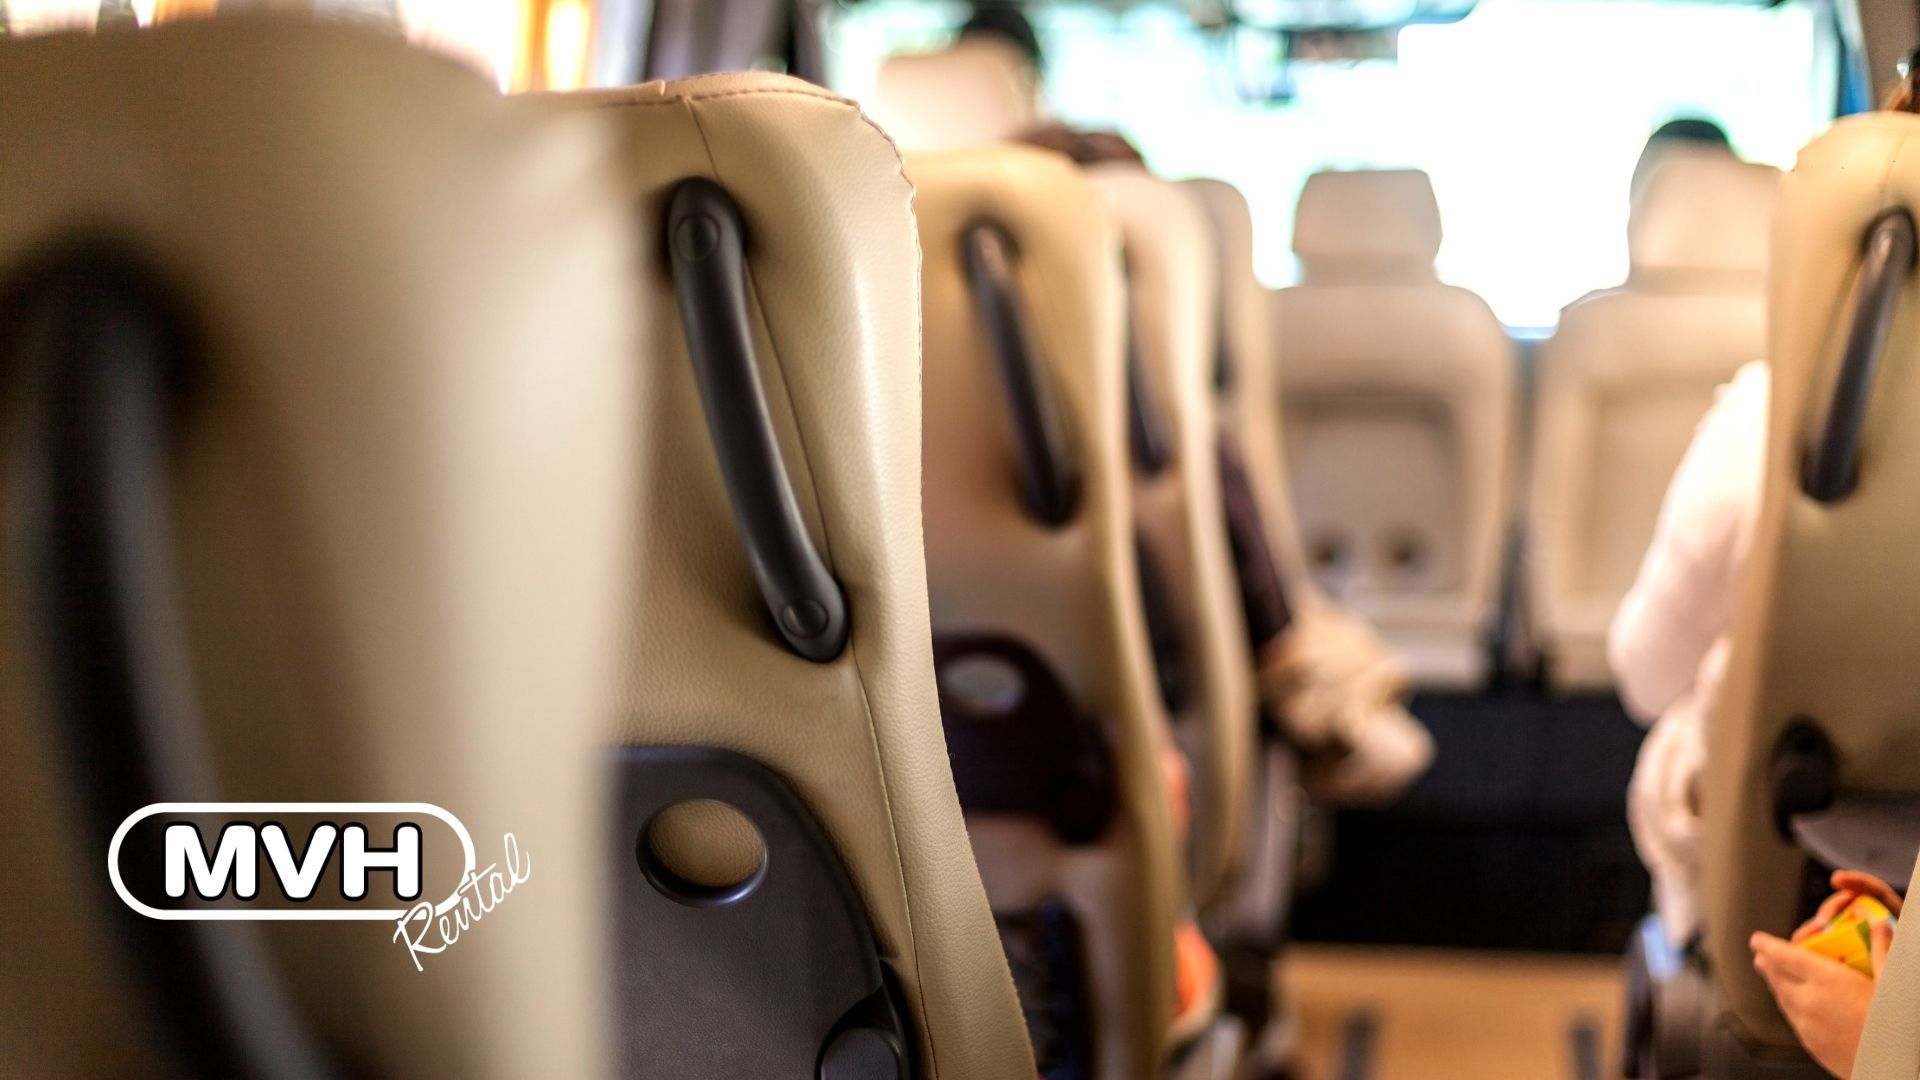 It's longer and heavier than a car – and you've got passengers! But follow our minibus safety tips 